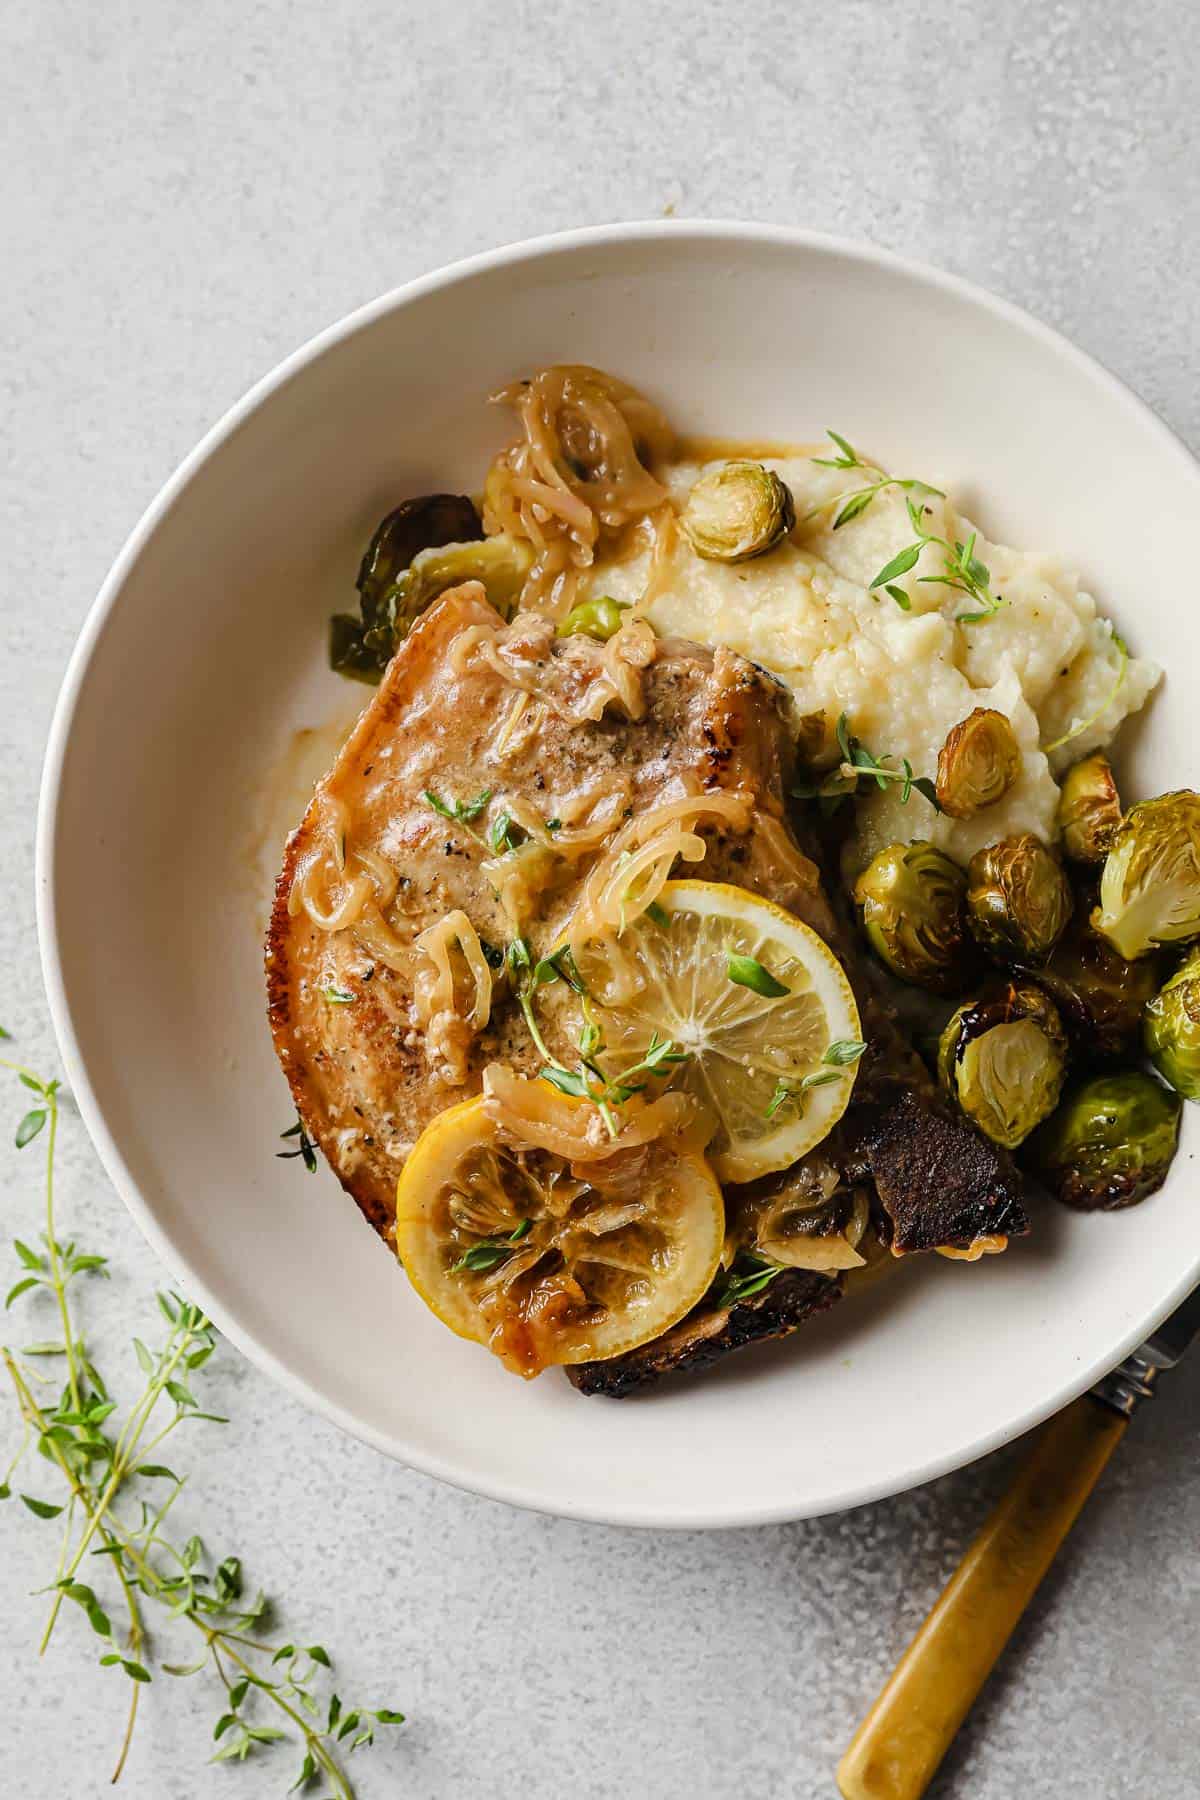 Lemon Thyme Pork Chops plated with mashed cauliflower and roasted brussels sprouts